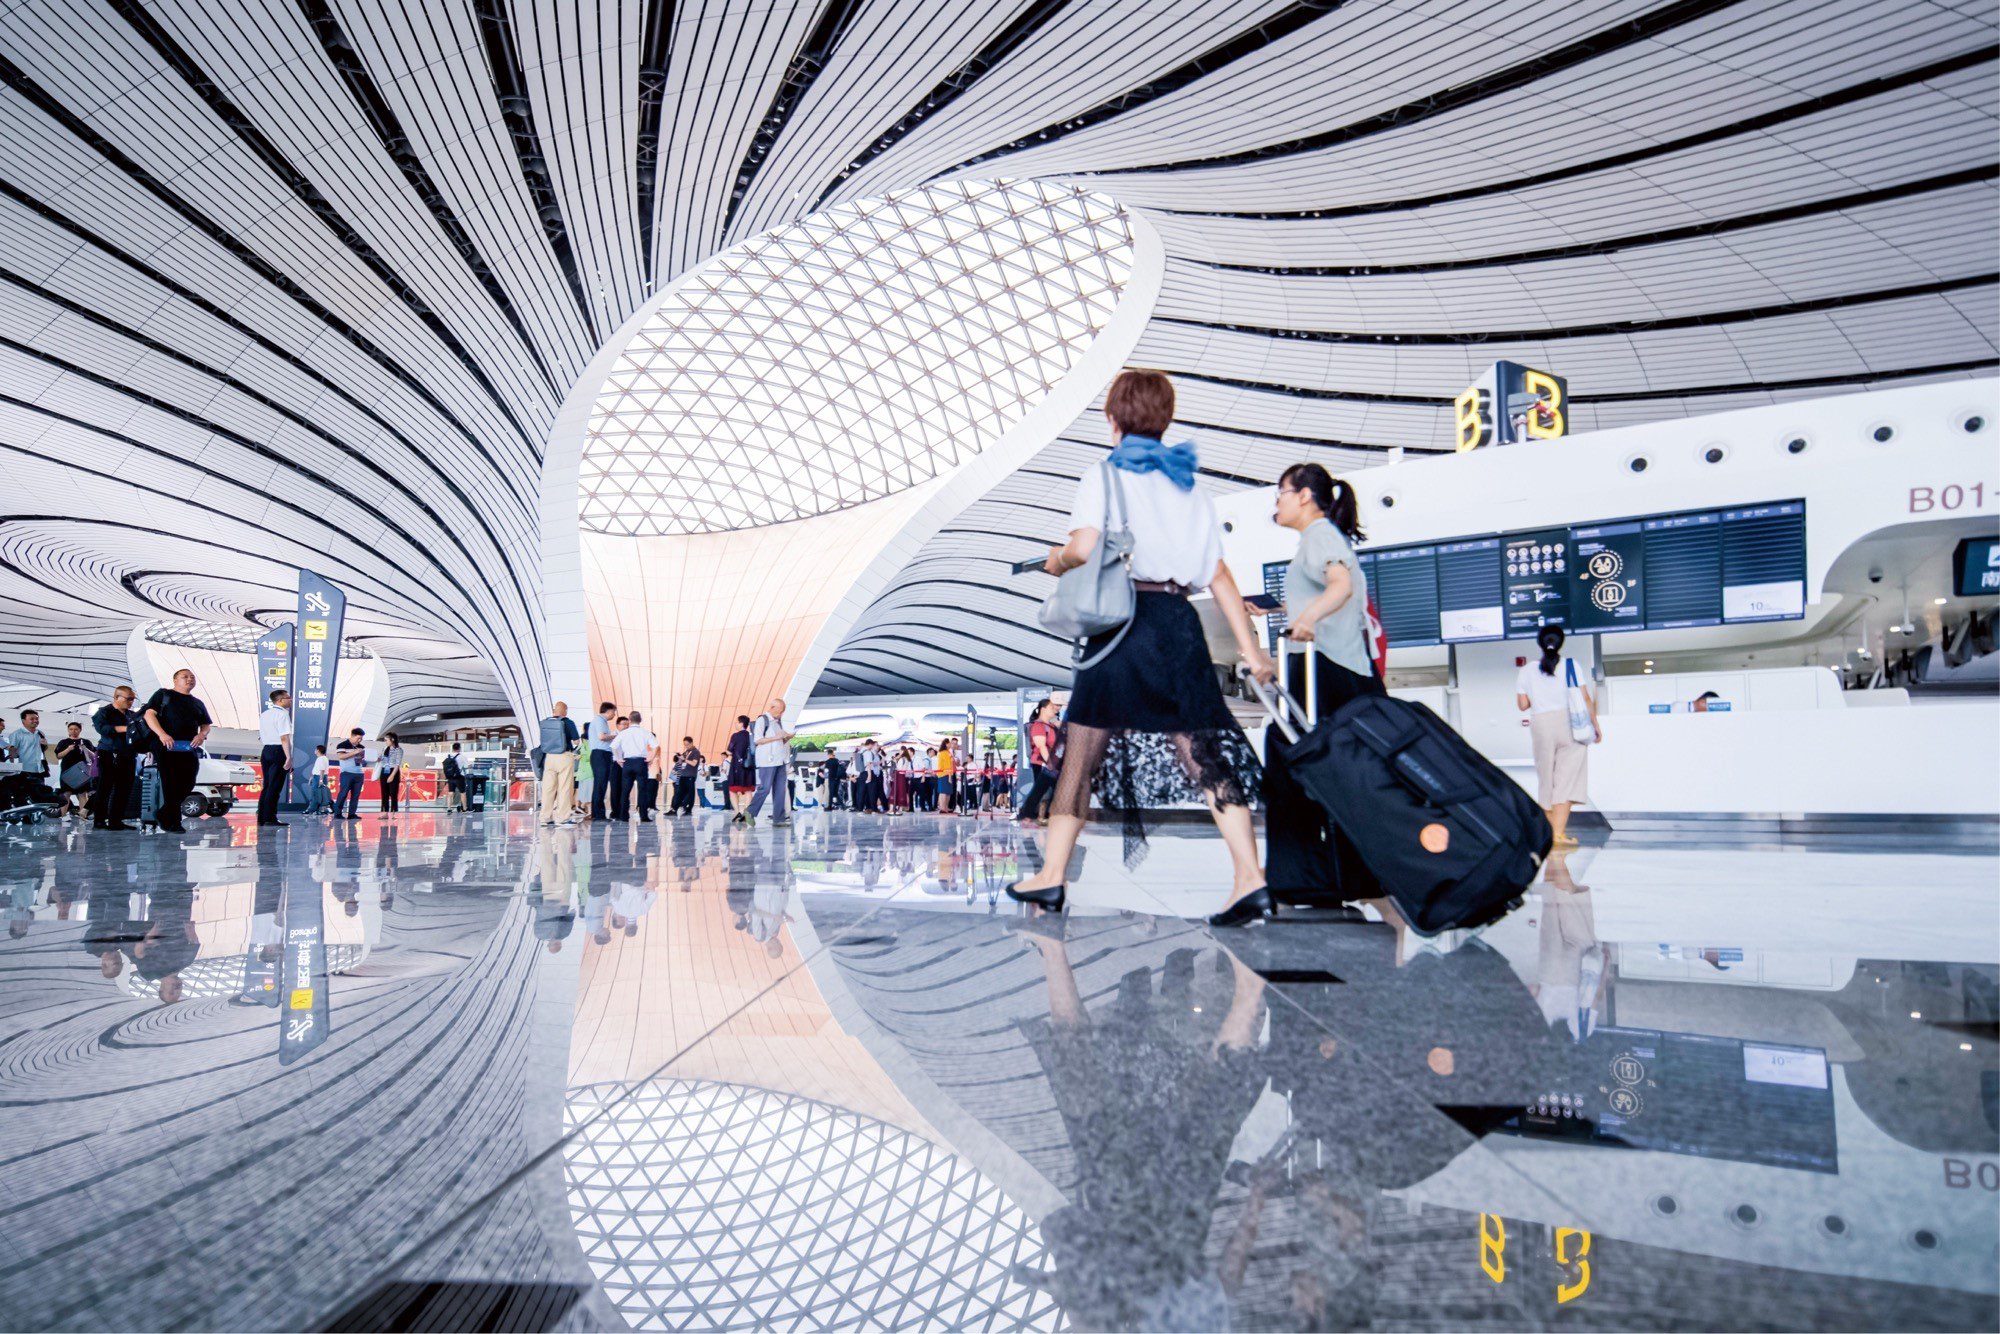 The main hall of Beijing Daxing International Airport in October 2019, one month after its opening.